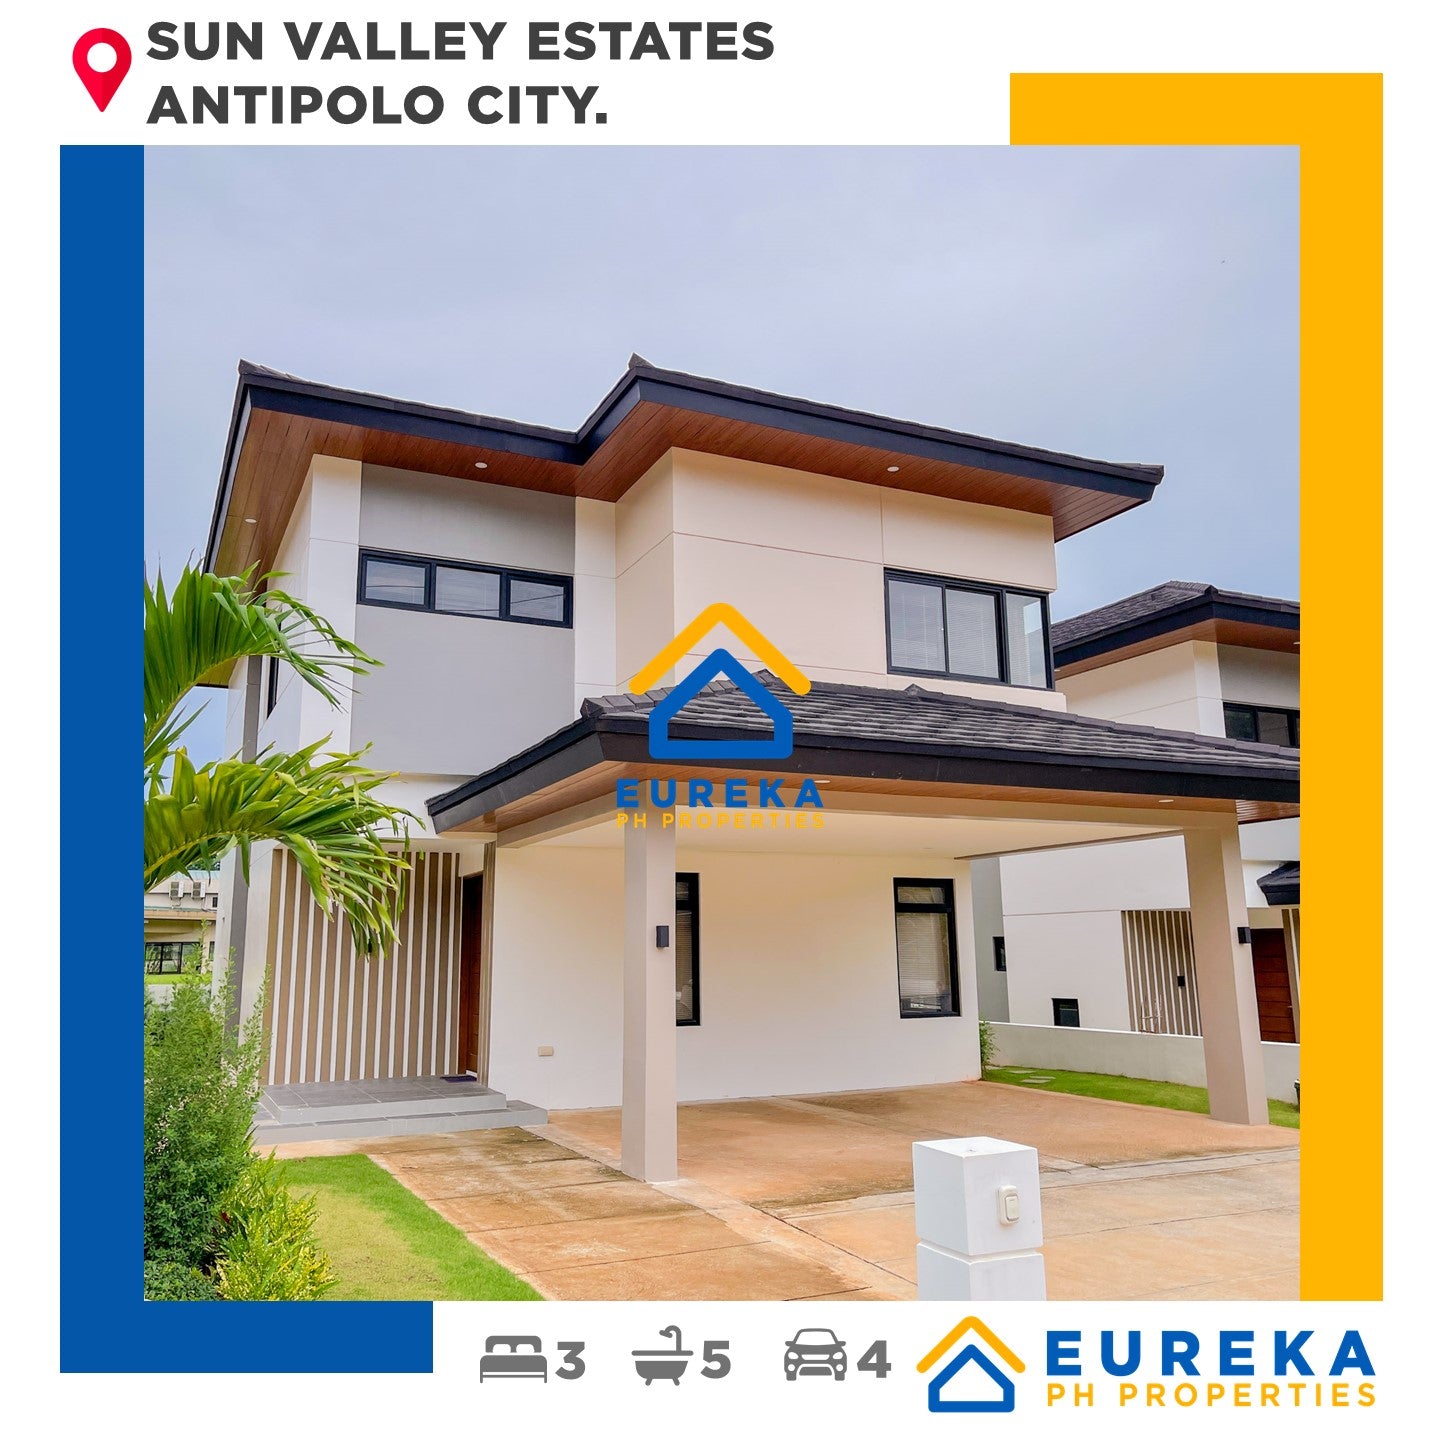 Brand new house and lot in Sun Valley Estates, Anti[polo City.